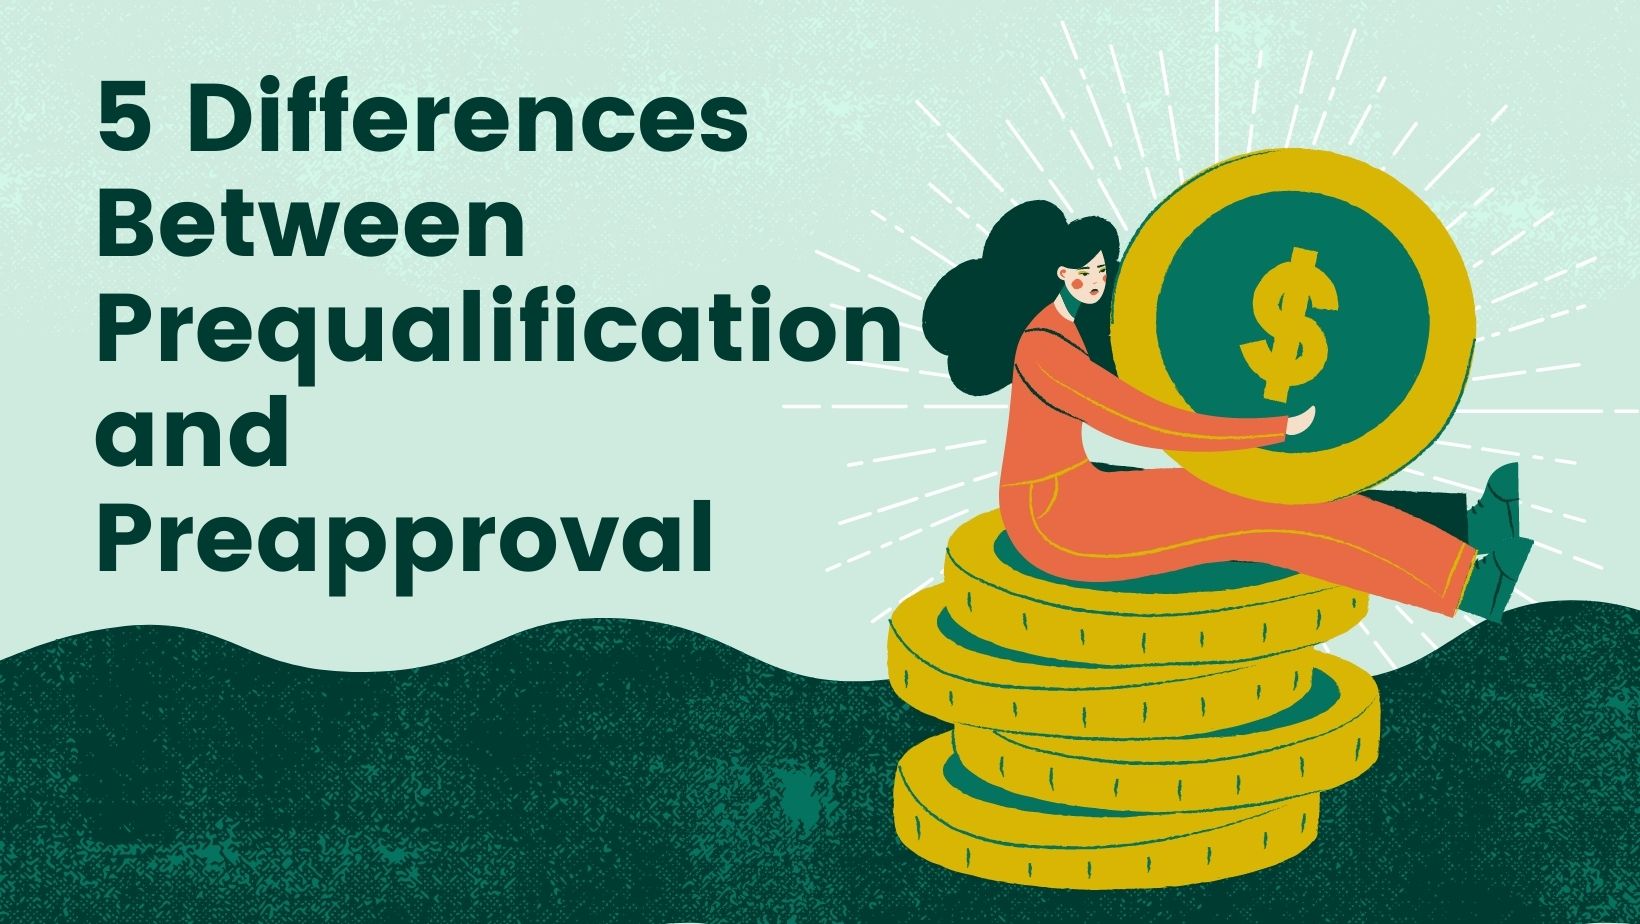 5 Differences Between Prequalification and Preapproval